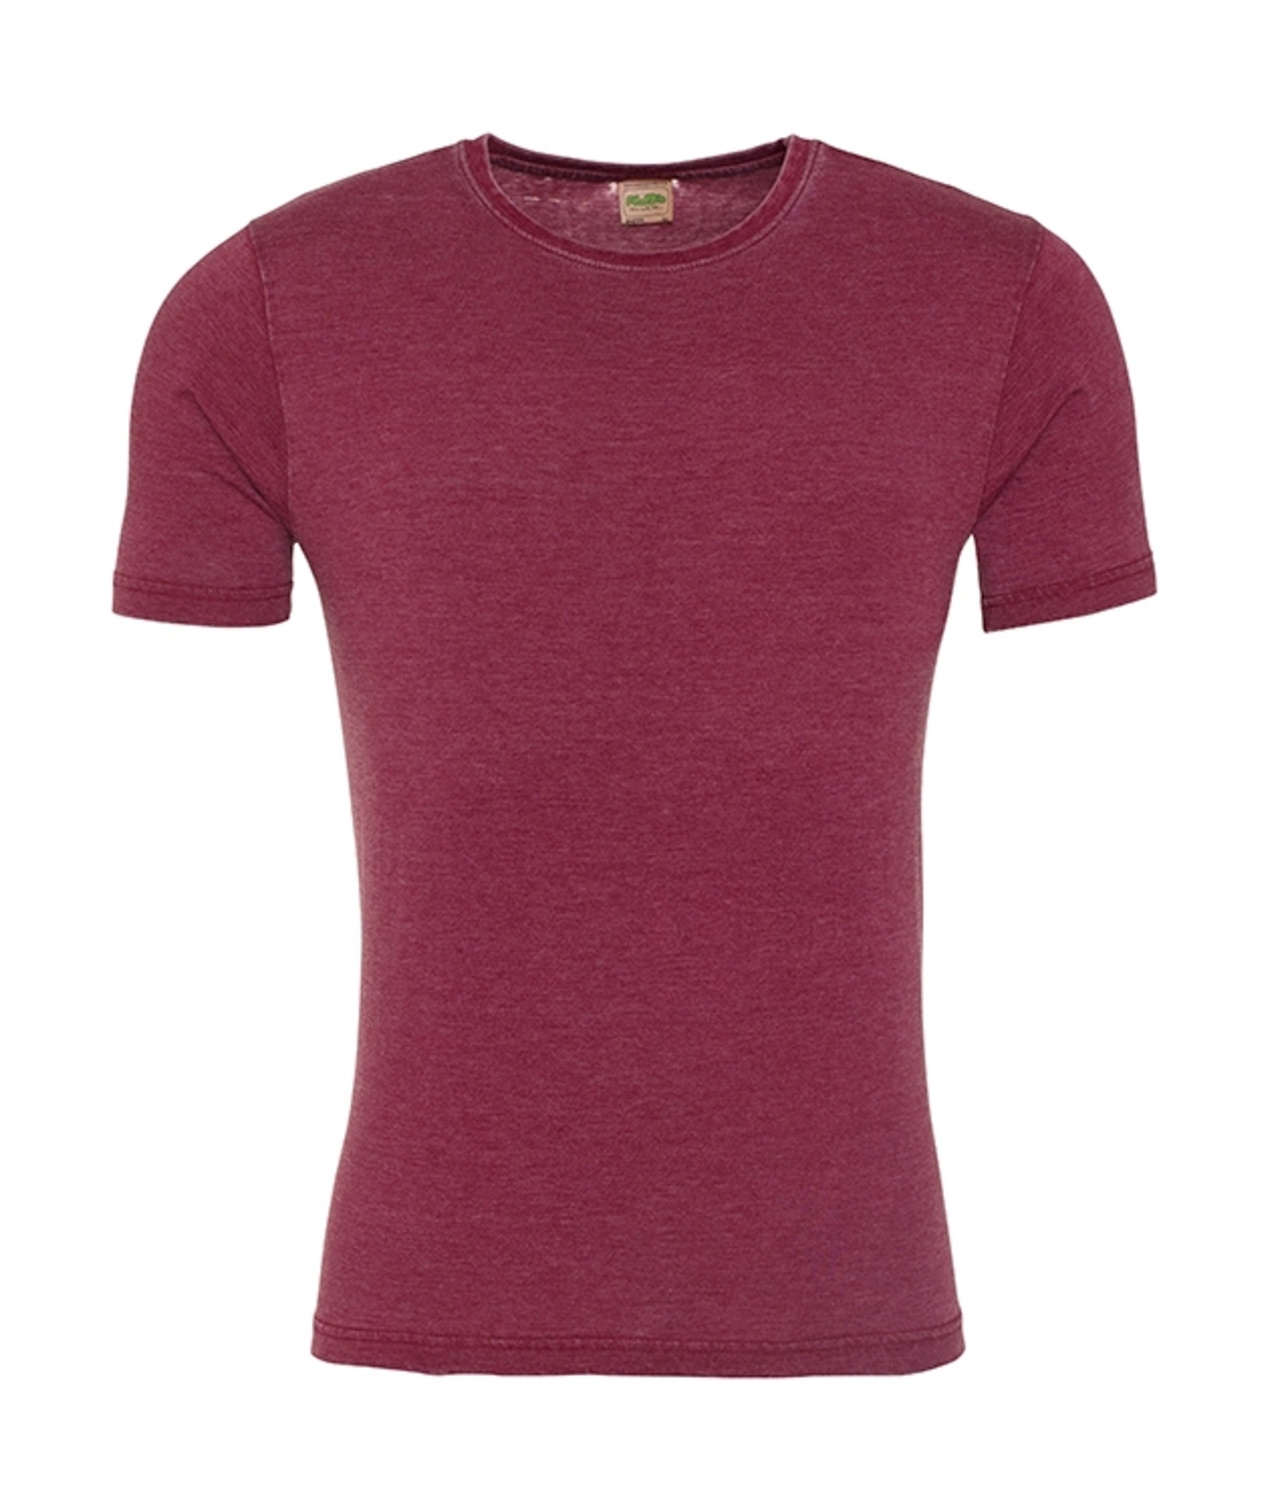 Just Ts Washed T - Burgundy - 3XL